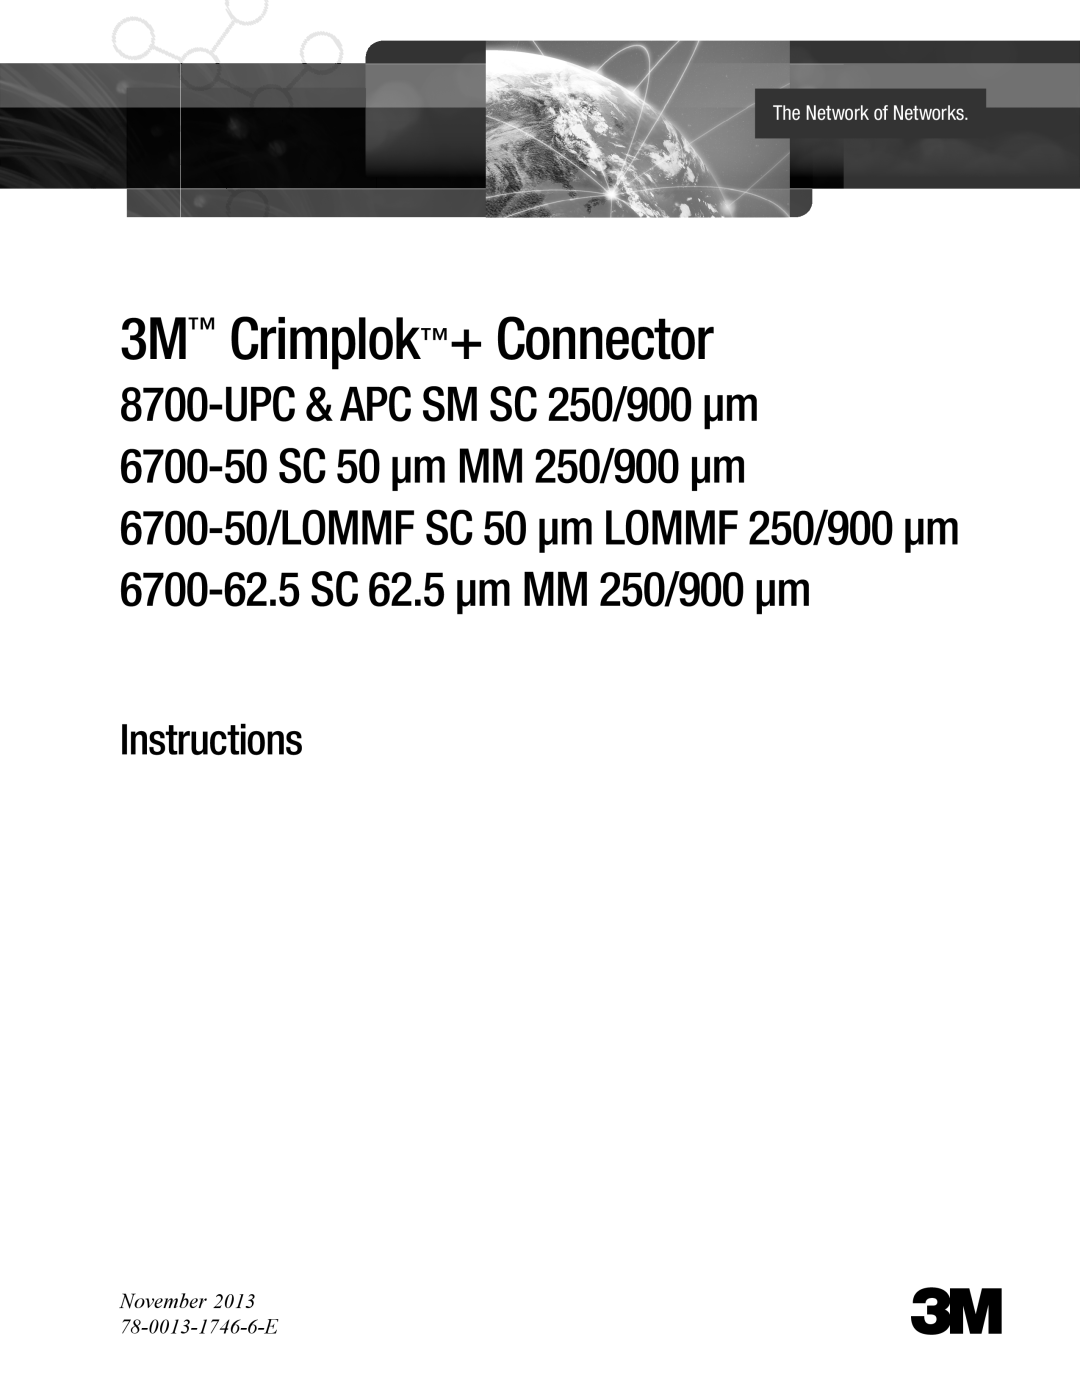 3M SC 250/900m manual The Network of Networks, 3M Crimplok+ Connector, 6700-62.5 SC 62.5 µm MM 250/900 µm, Instructions 